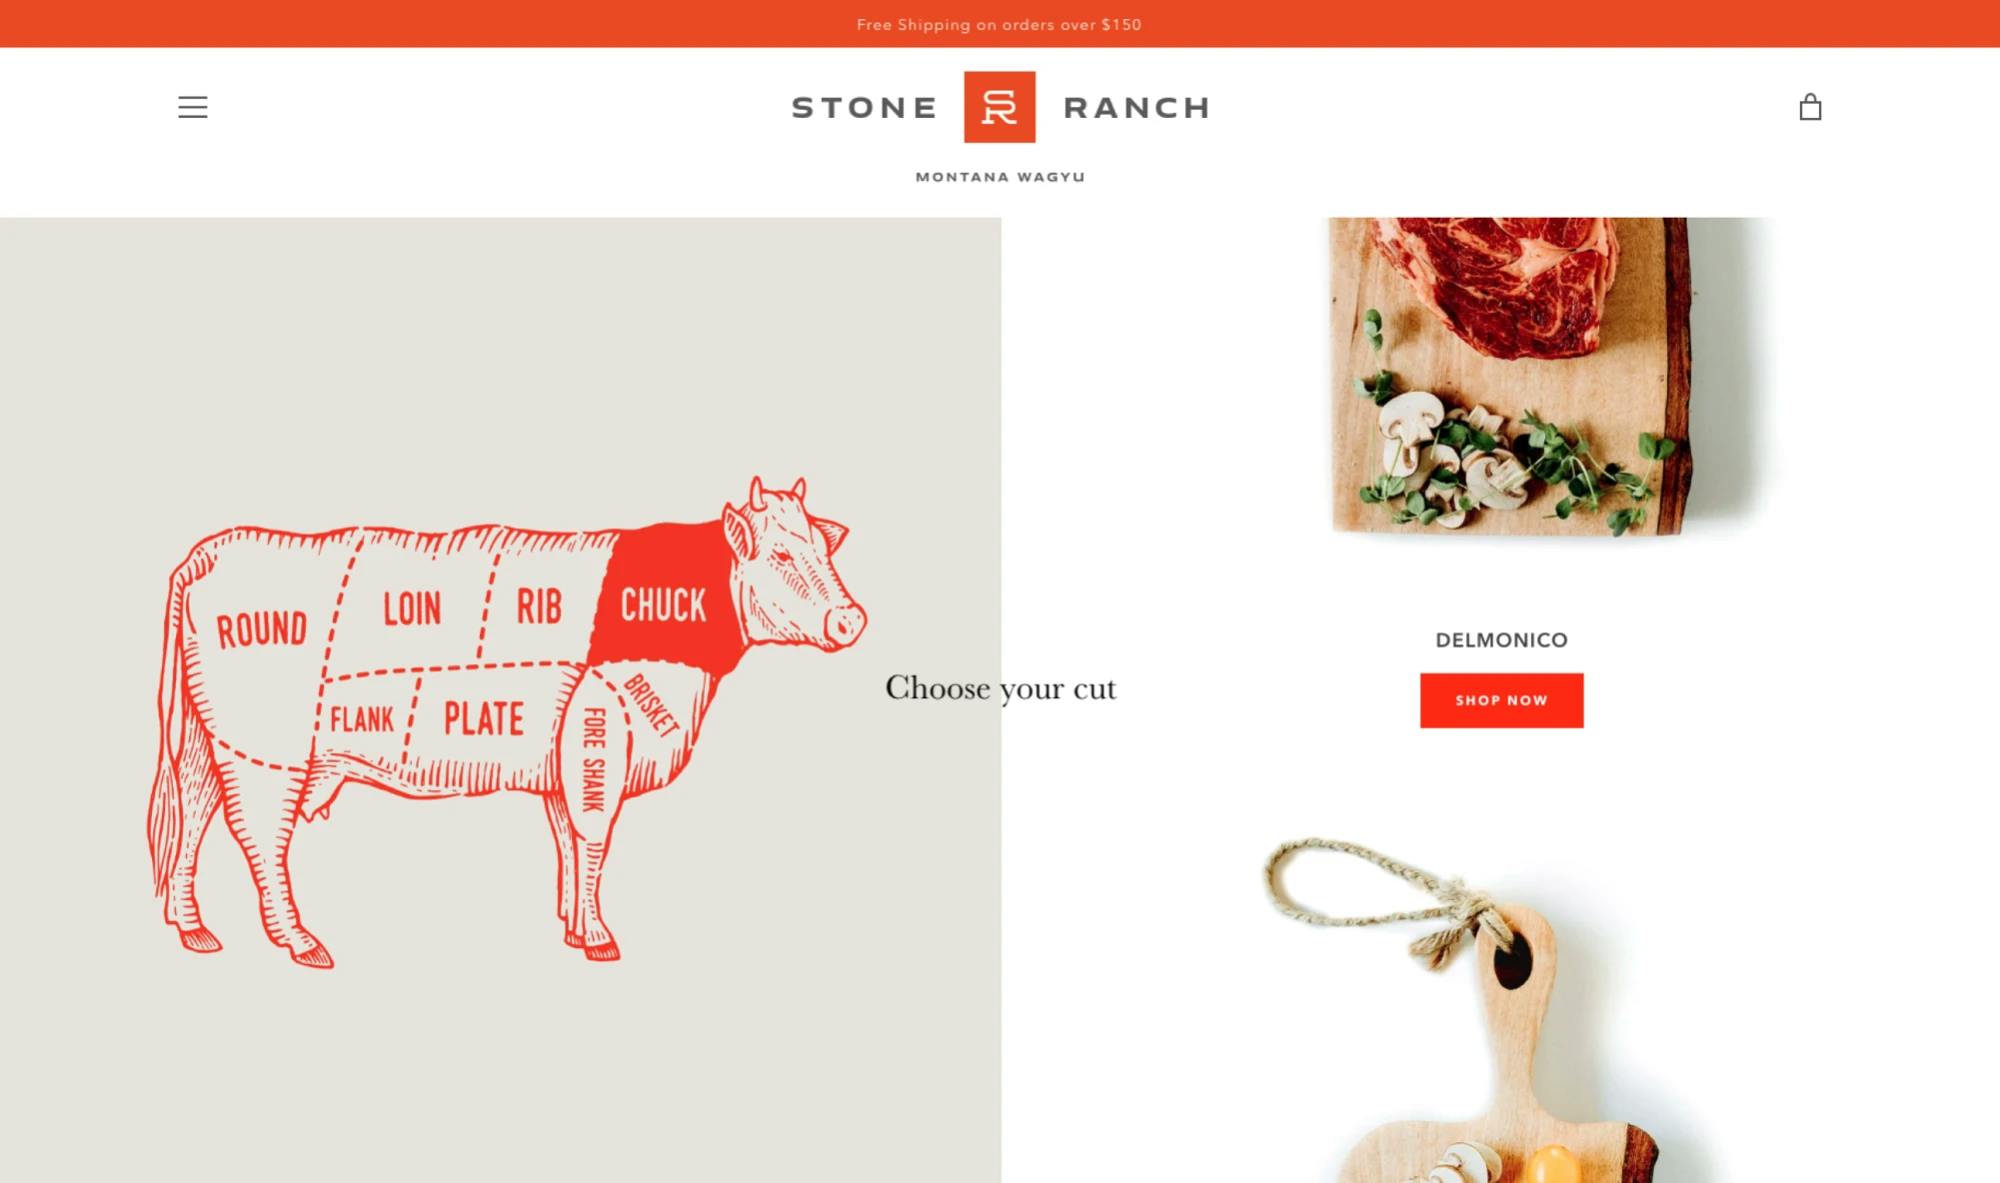 stone ranch montana meats section on home page